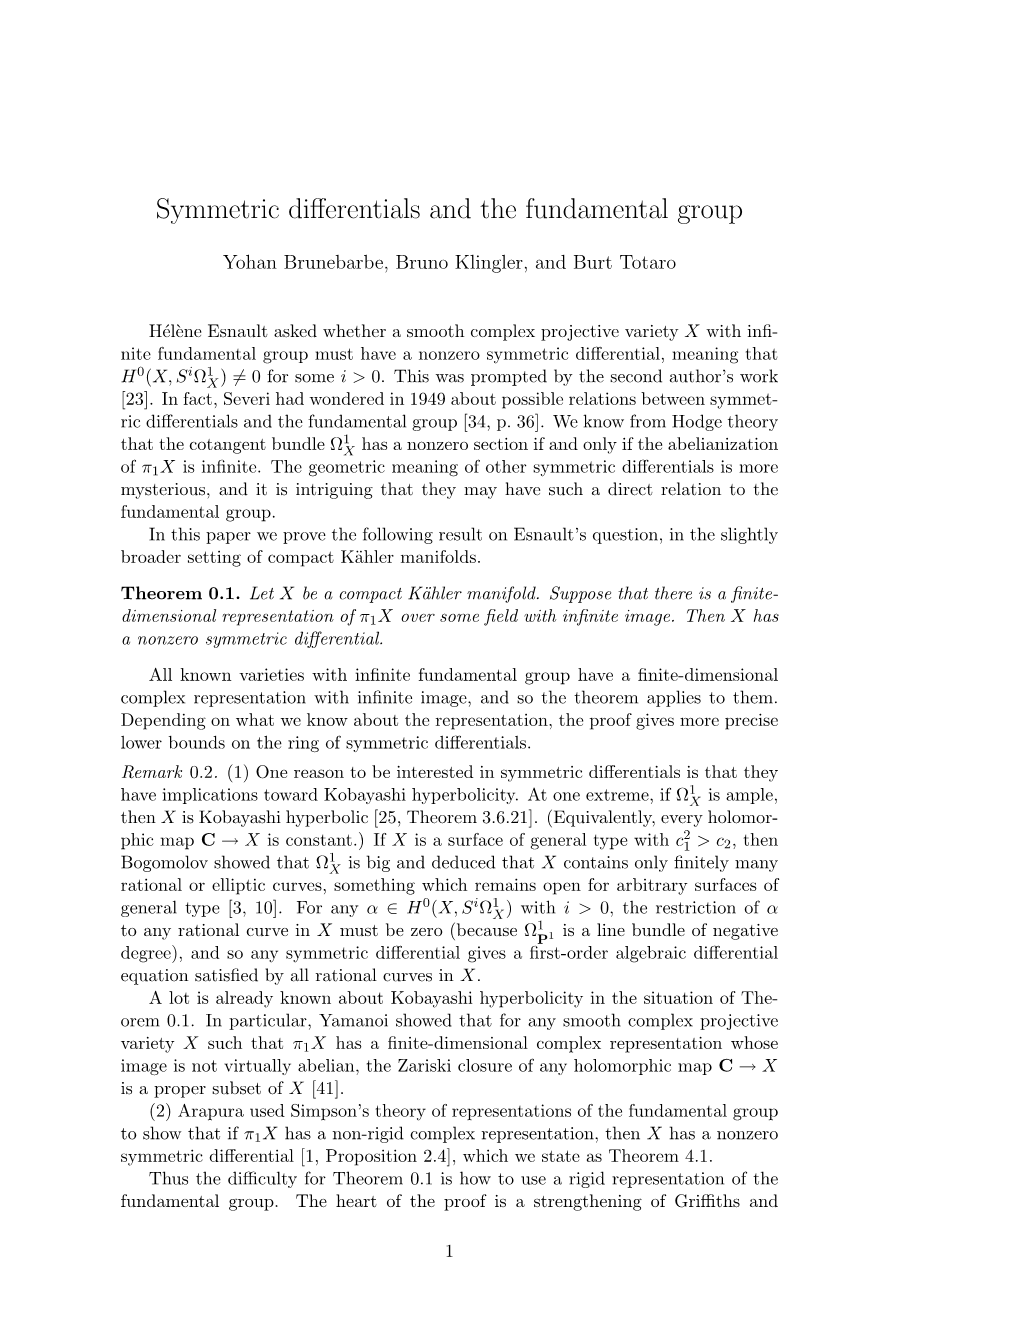 Symmetric Differentials and the Fundamental Group